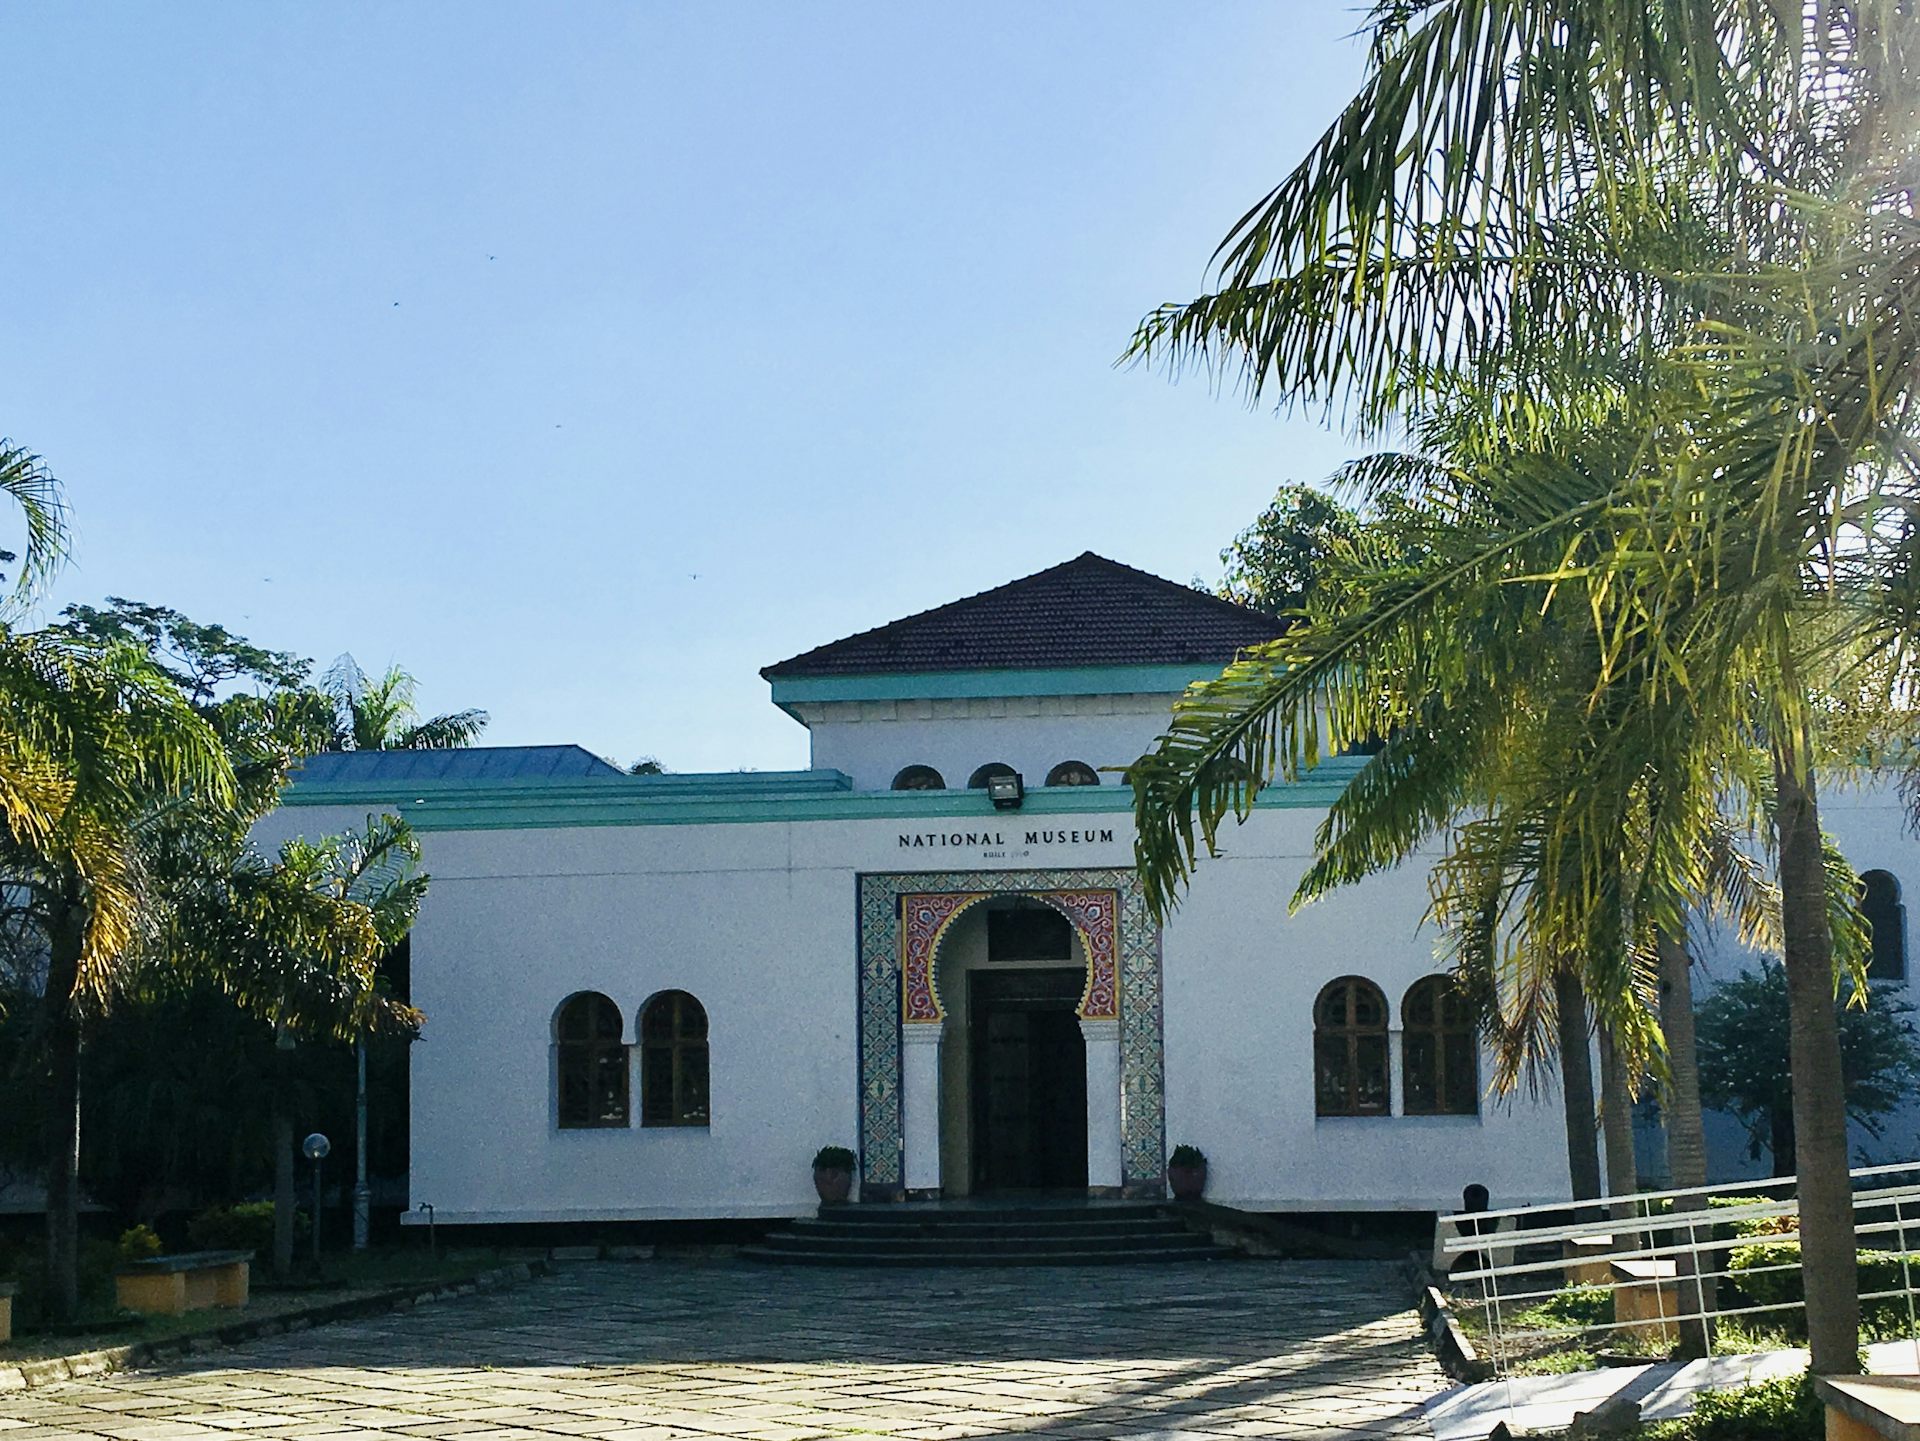 White and teal museum building surrounded by palm trees